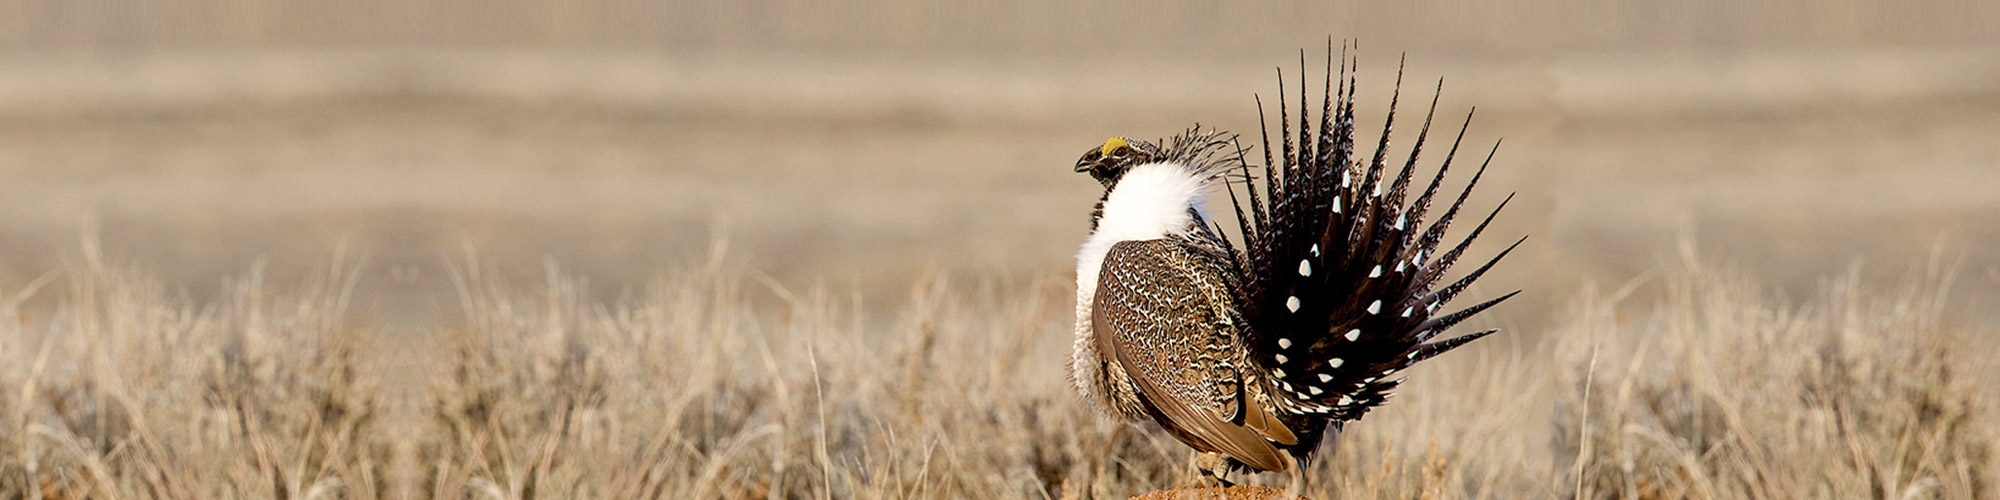 harney county greater sage grouse conservation efforts